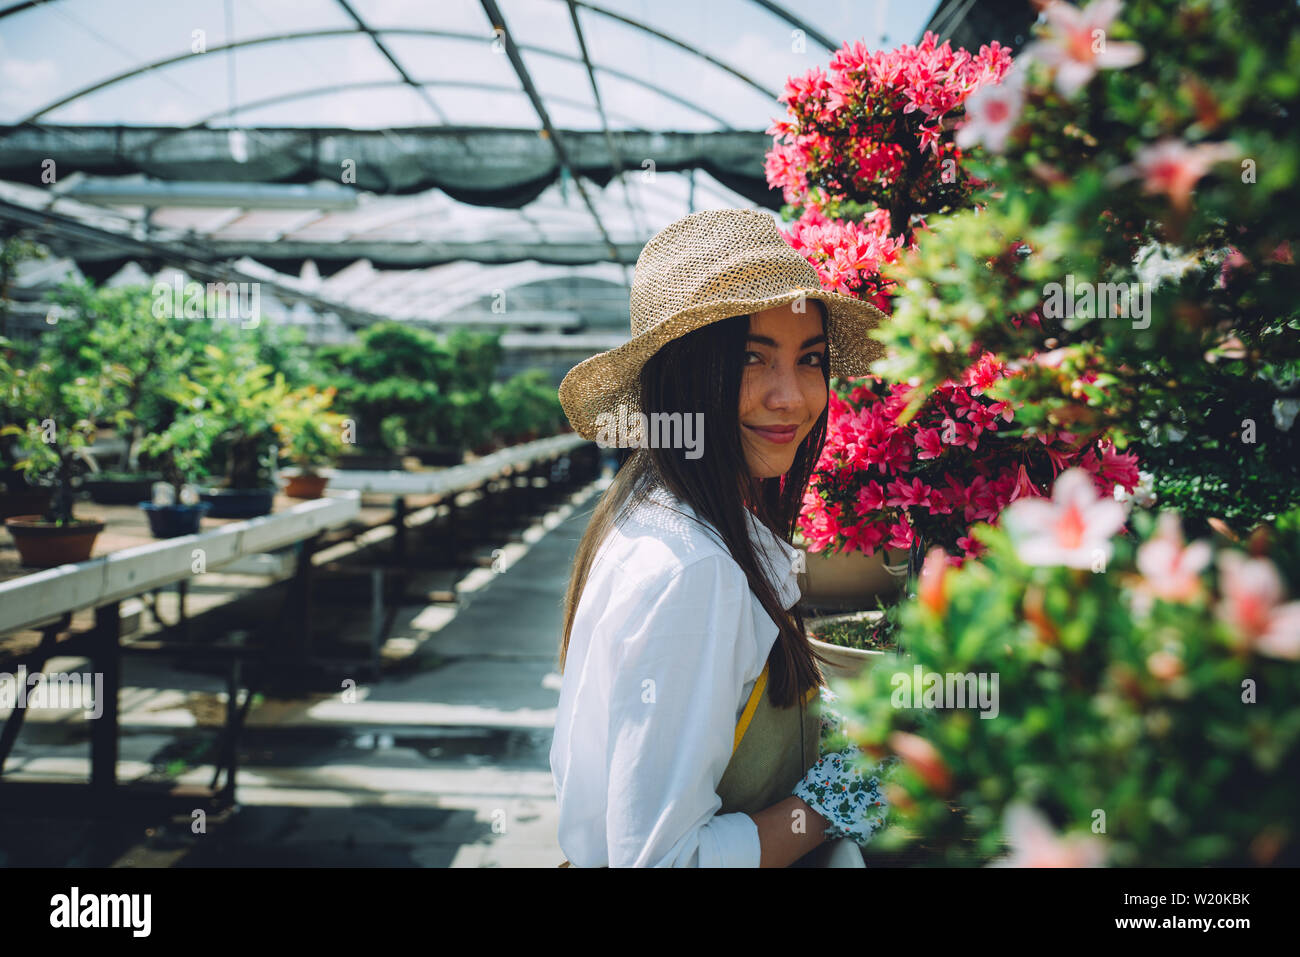 Bonsai greenhouse center. rows with small trees, woman working and taking care of the plants Stock Photo